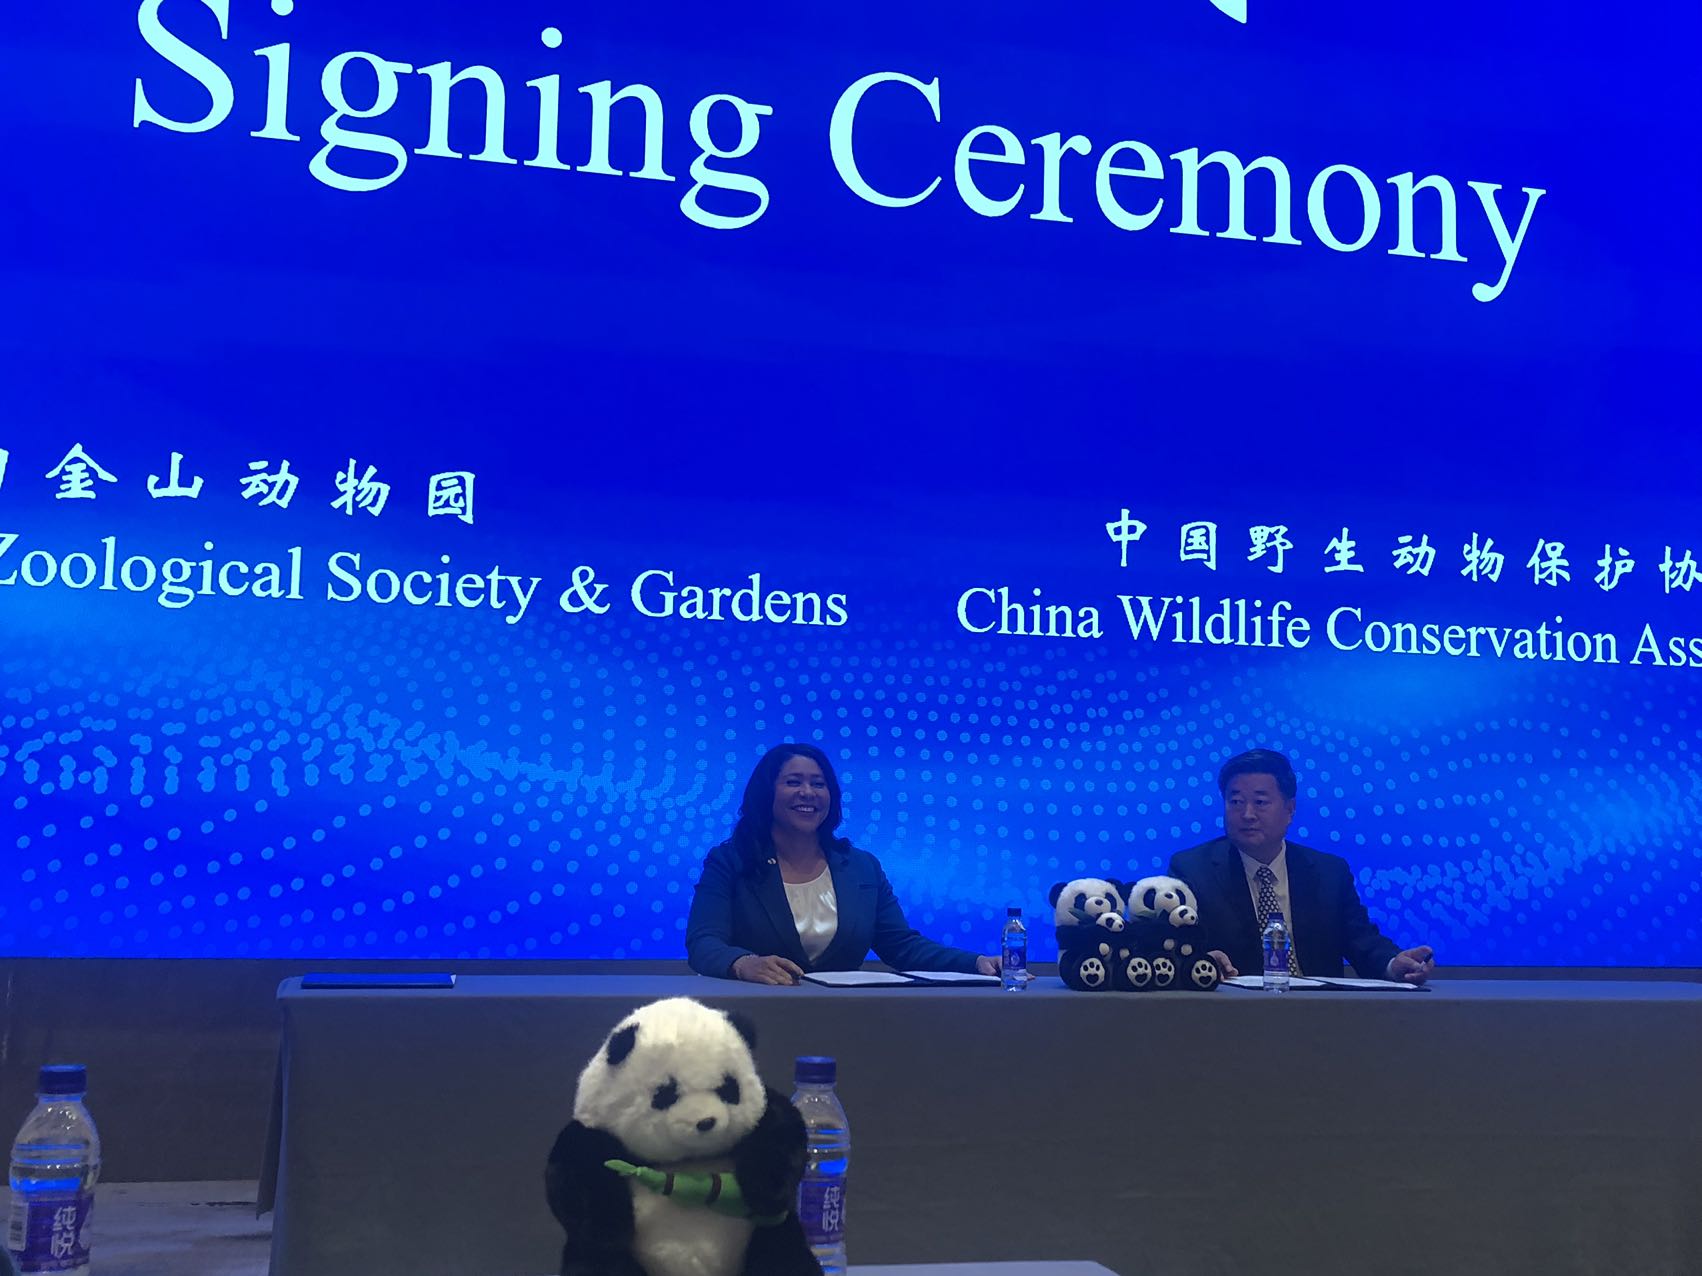 Two people are seated at a table with a "Signing Ceremony" backdrop, flanked by plush panda toys.